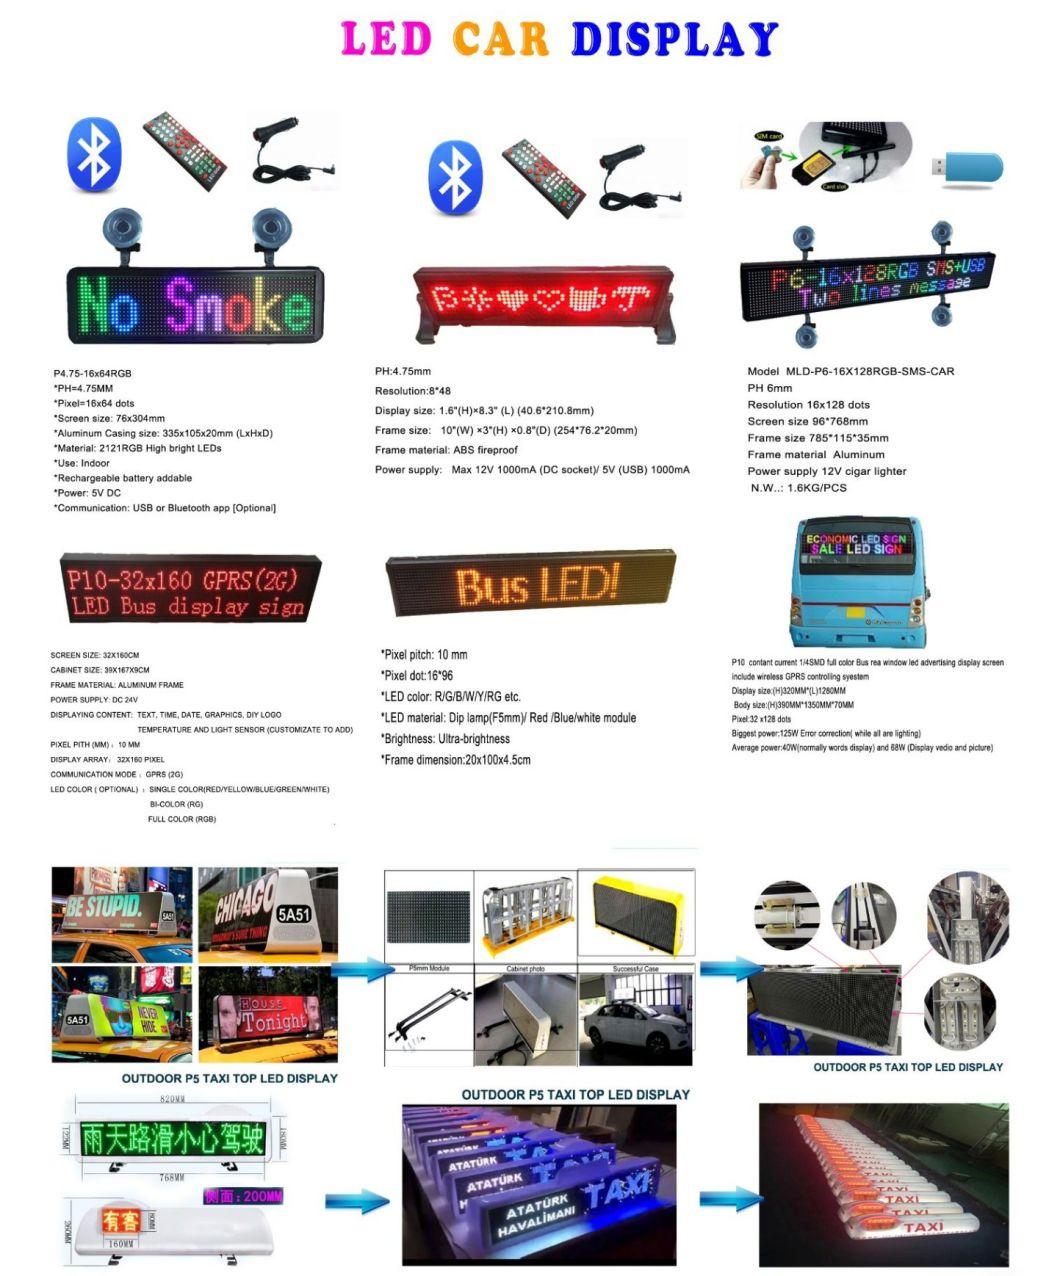 Wholesale Indoor and Outdoor LED Displays Suitable for Store Advertising Signs